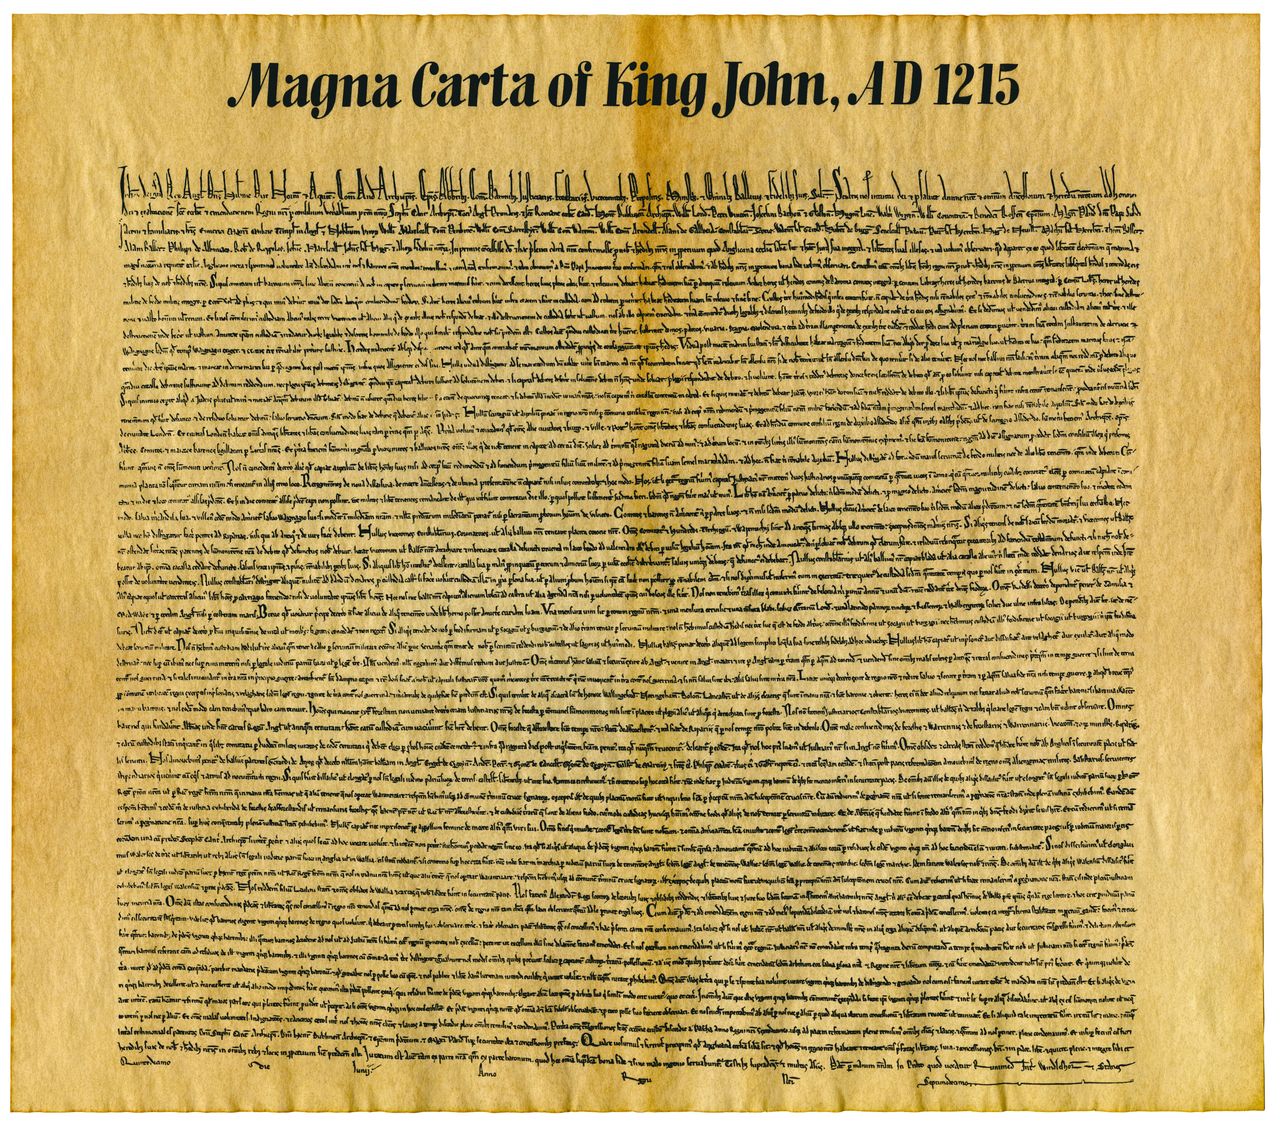 Magna Carta or Magna Carta Libertatum, is an English legal charter that required King John of England to proclaim certain rights, respect certain legal procedures, and accept that his will could be bound by the law.